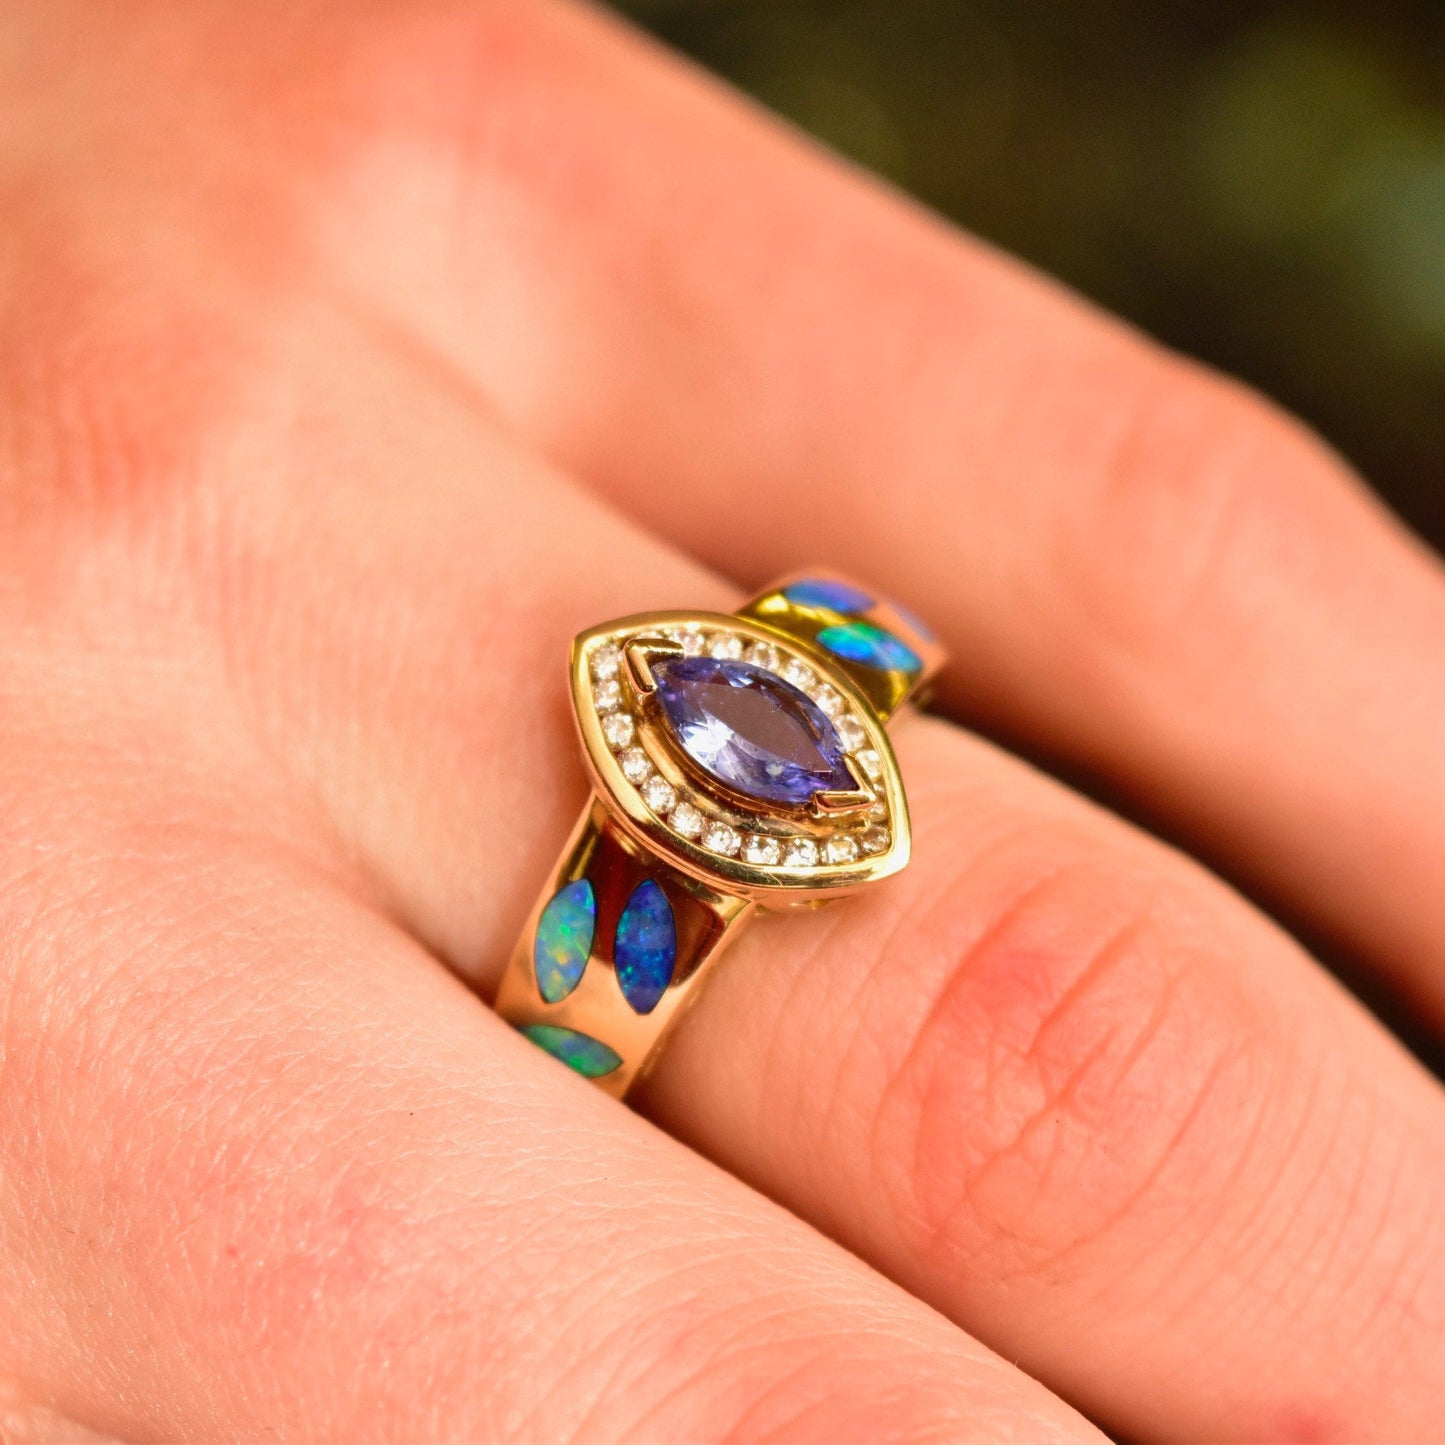 14K yellow gold marquise tanzanite ring with diamond halo and colorful blue opal inlay on finger, size 7 1/2 US cocktail ring